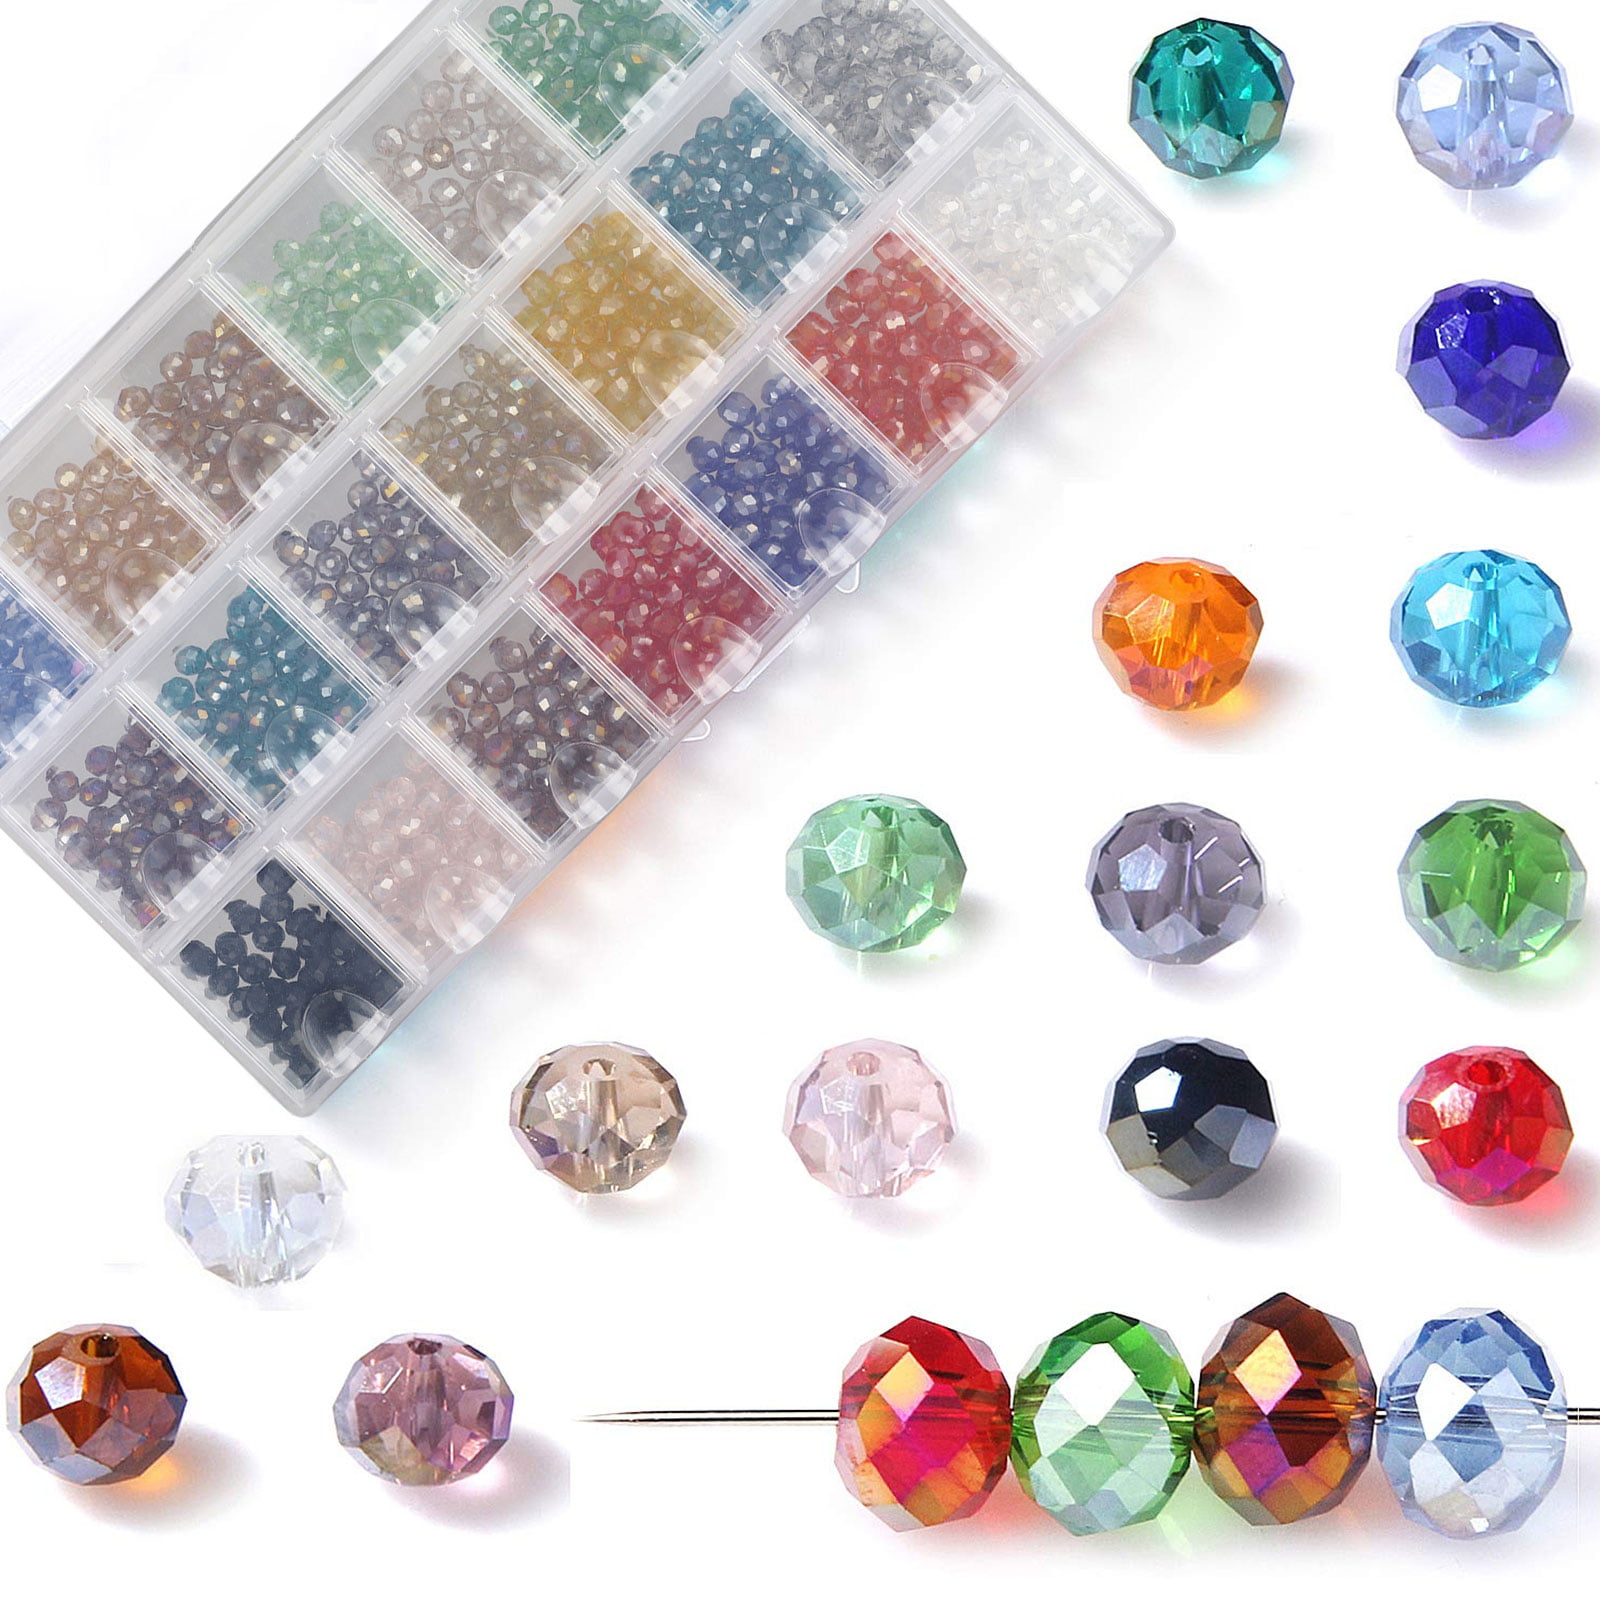 10pcs 12x7mm 14x9mm Rondelle Faceted Crystal Glass Loose Craft Beads lot 